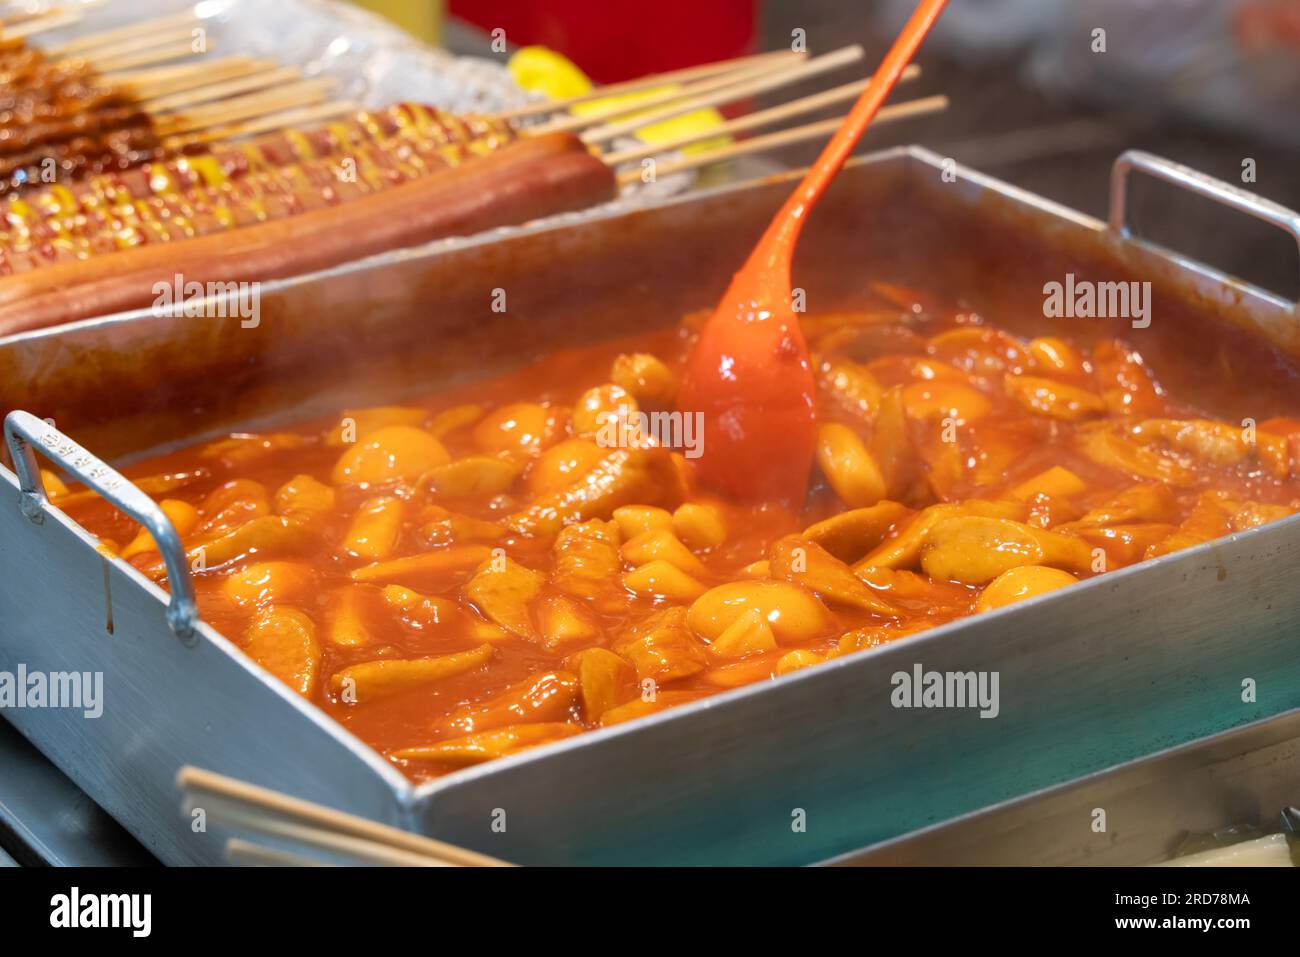 Delicious Korean cuisine Tteokbokki, tasty spicy rice cake with sausages, eggs in market for street food snacks. Stock Photo